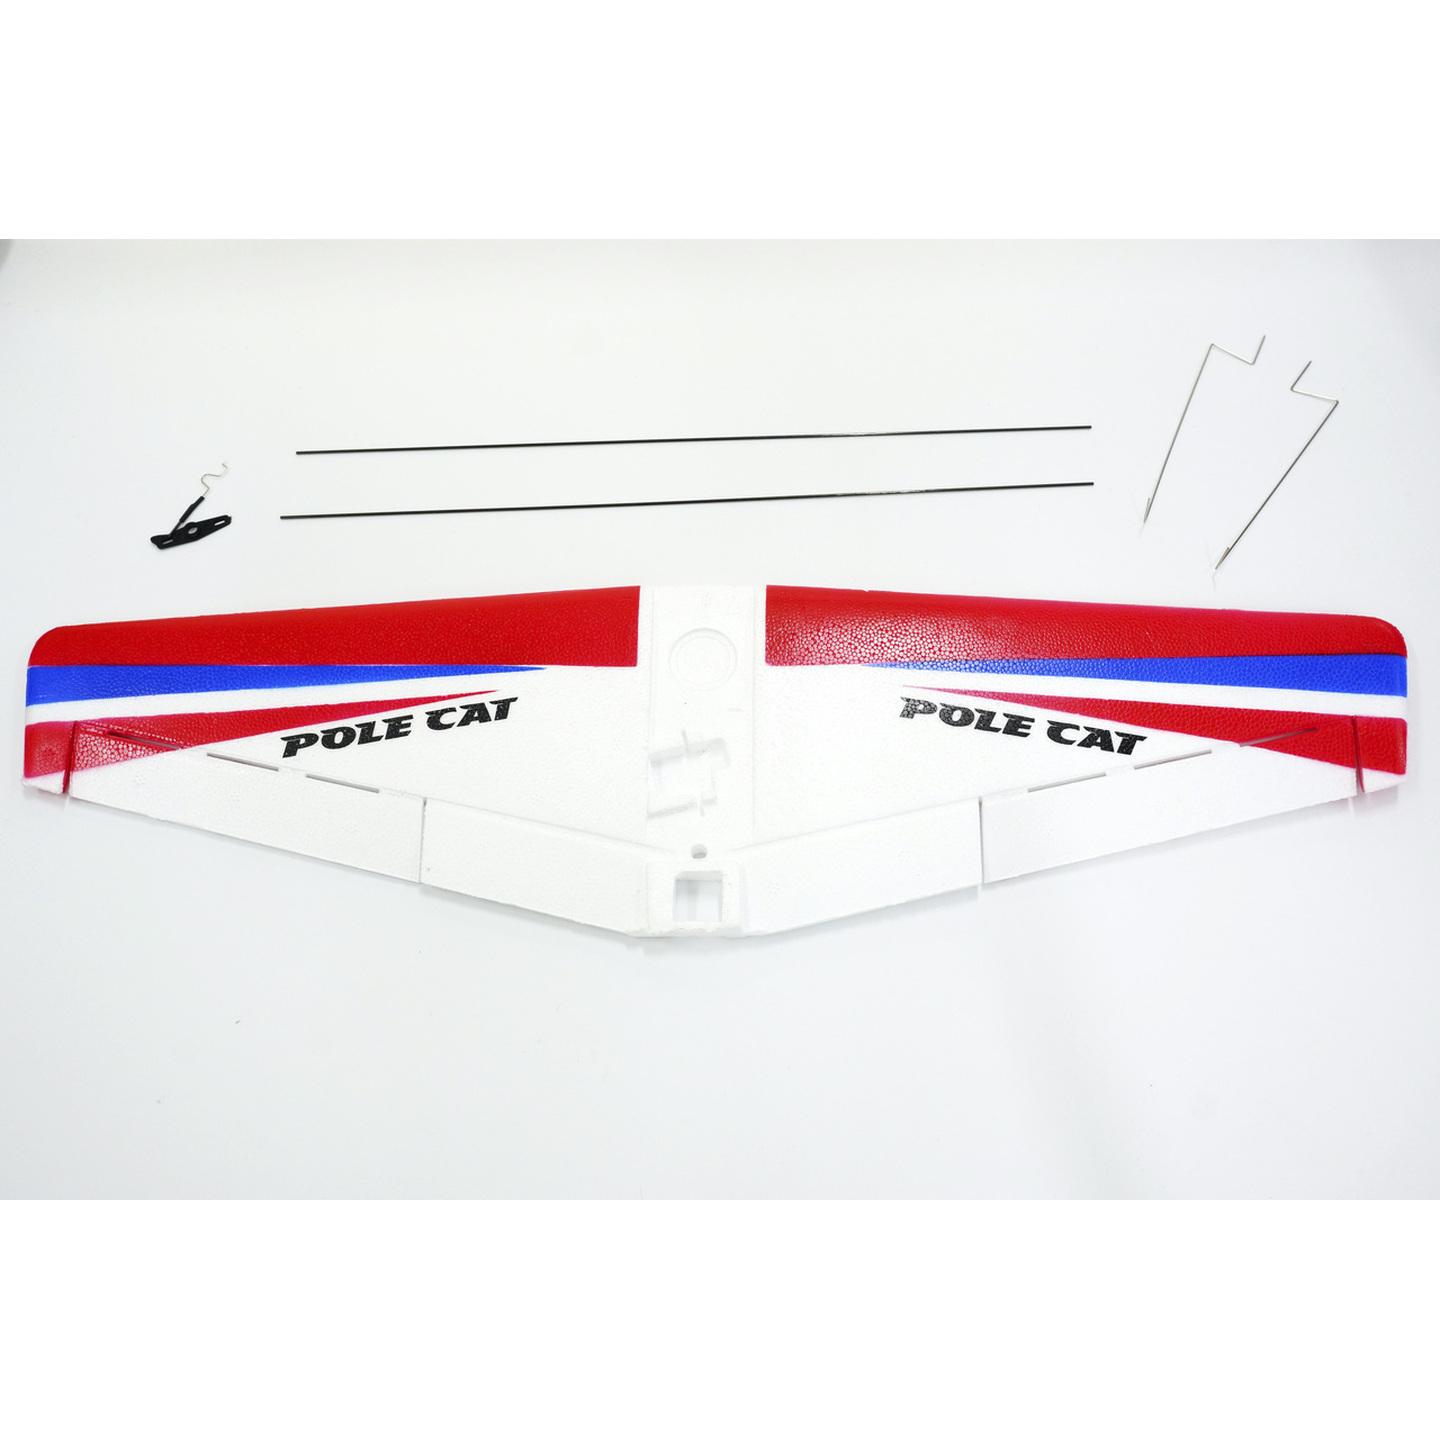 Wing and Aileron Rudder Rod kit suit GT4050 RC Plane